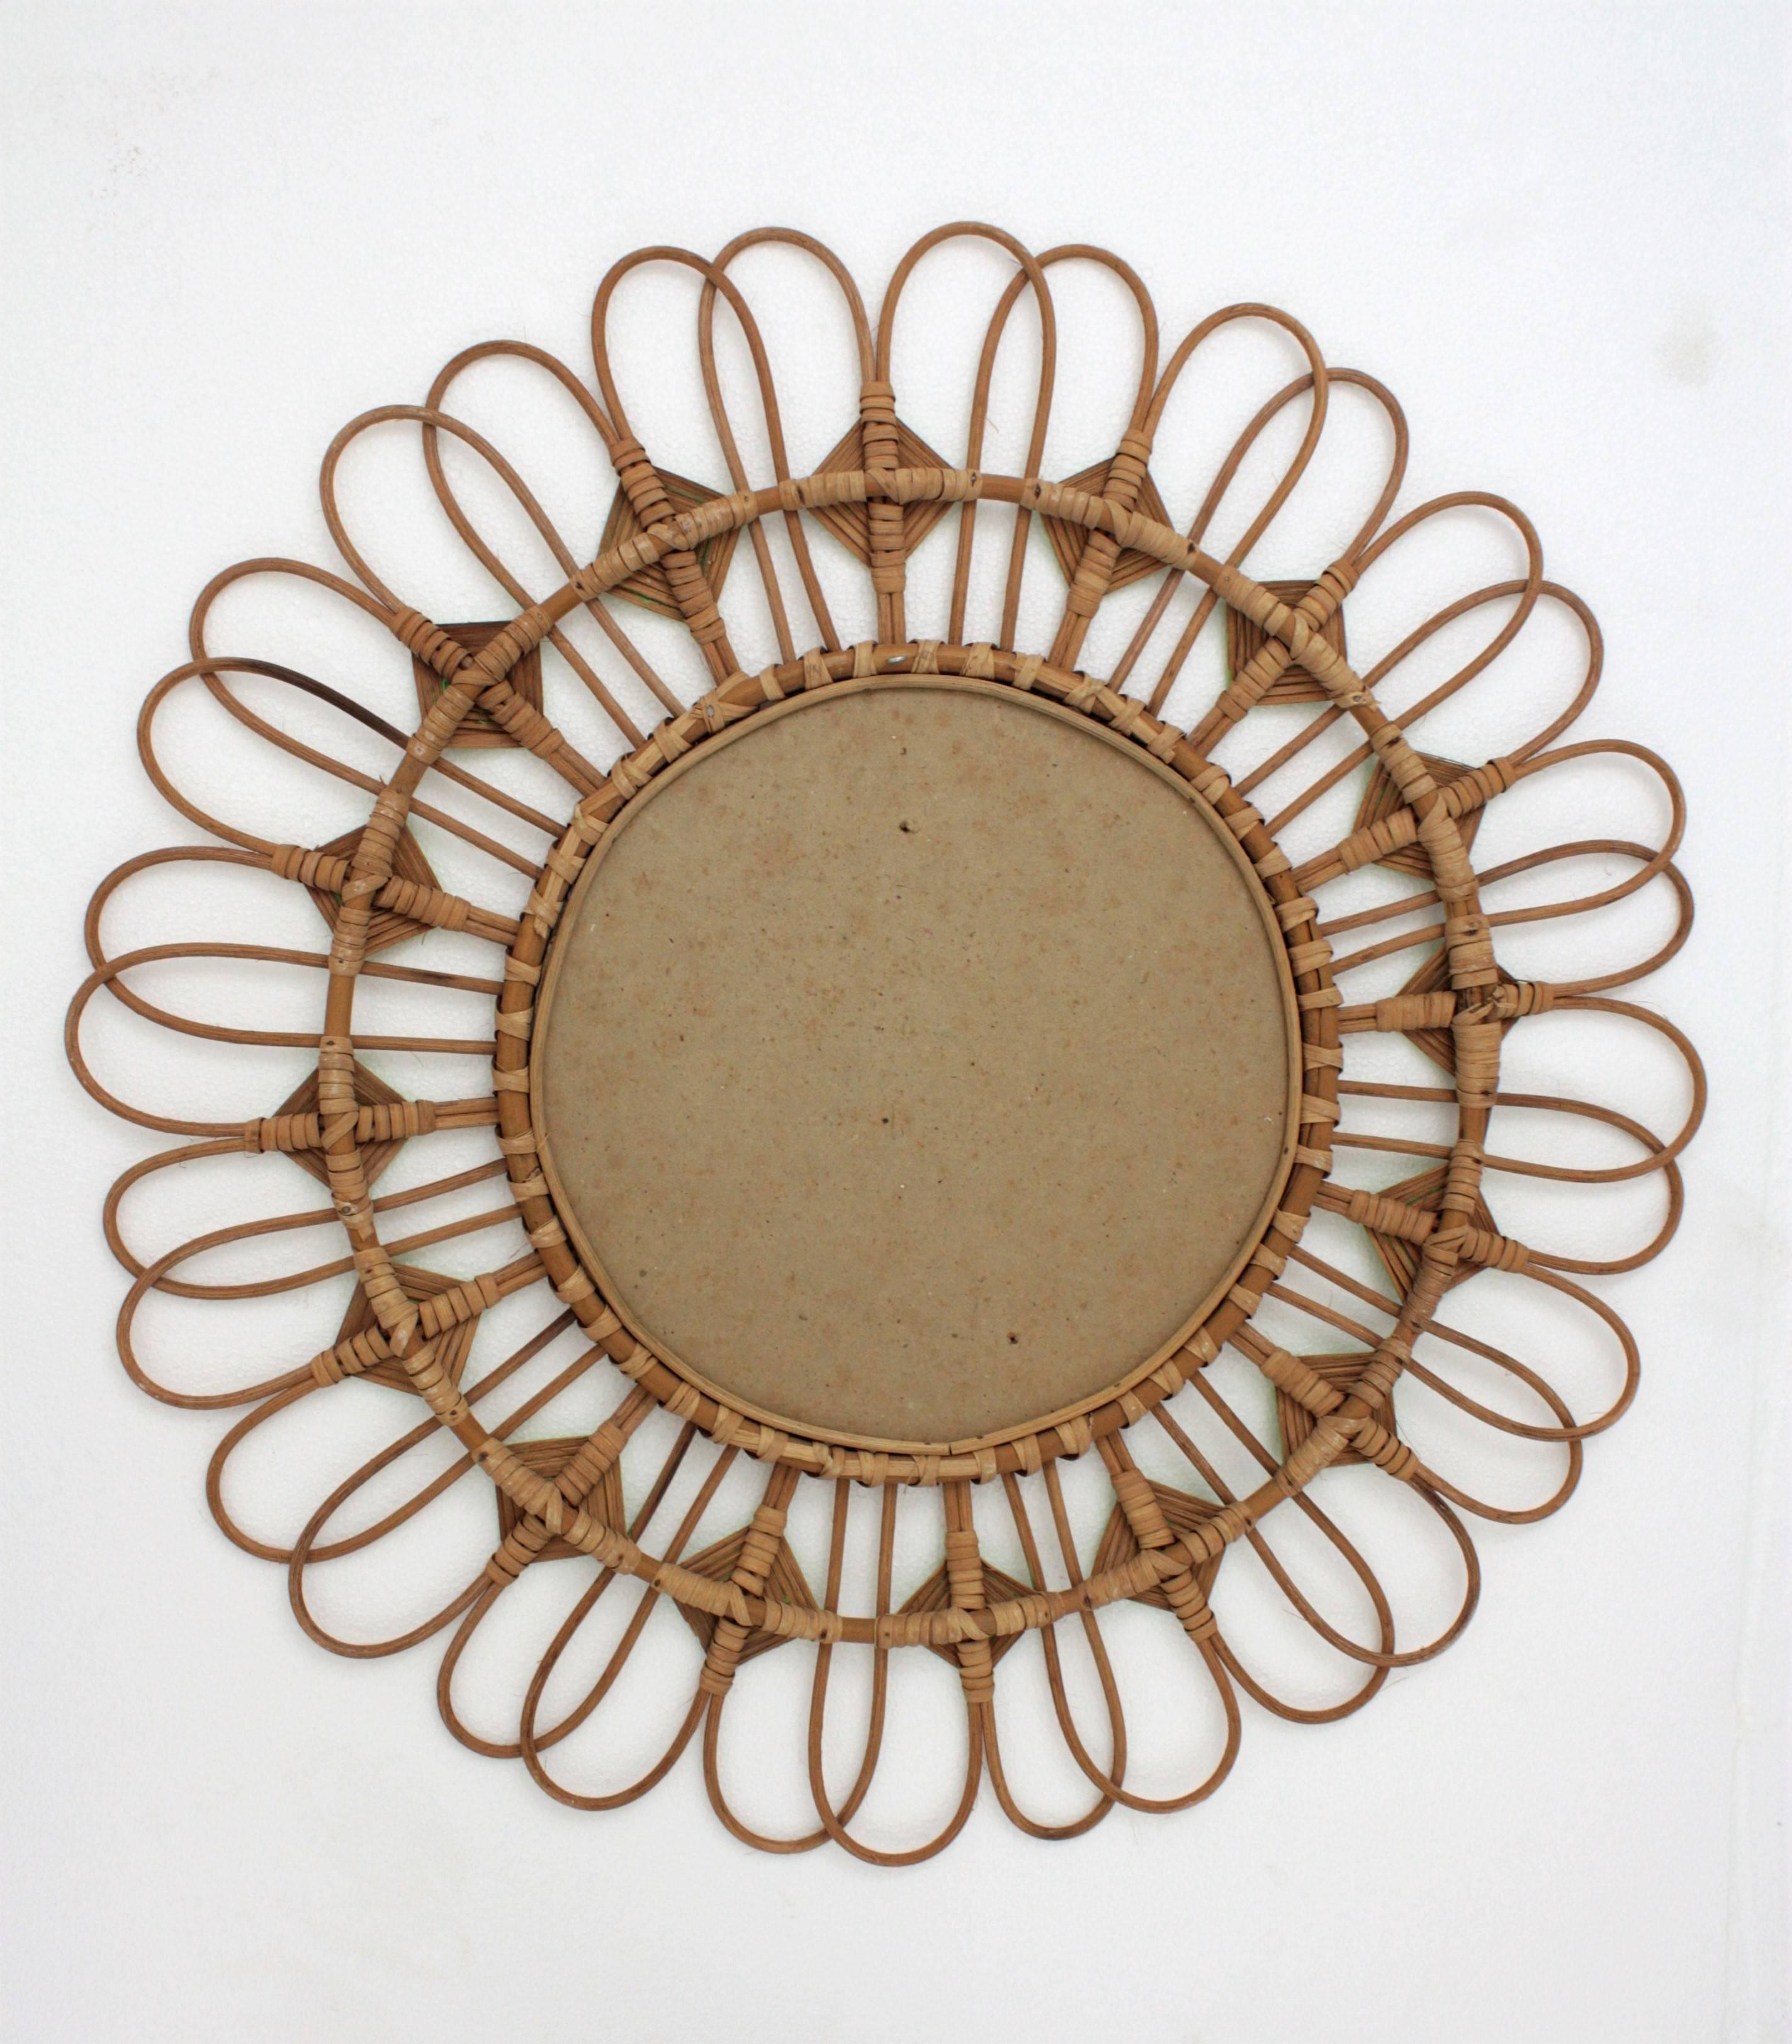 Rattan Sunburst Flower Mirror with Green Accents, 1950s For Sale 4